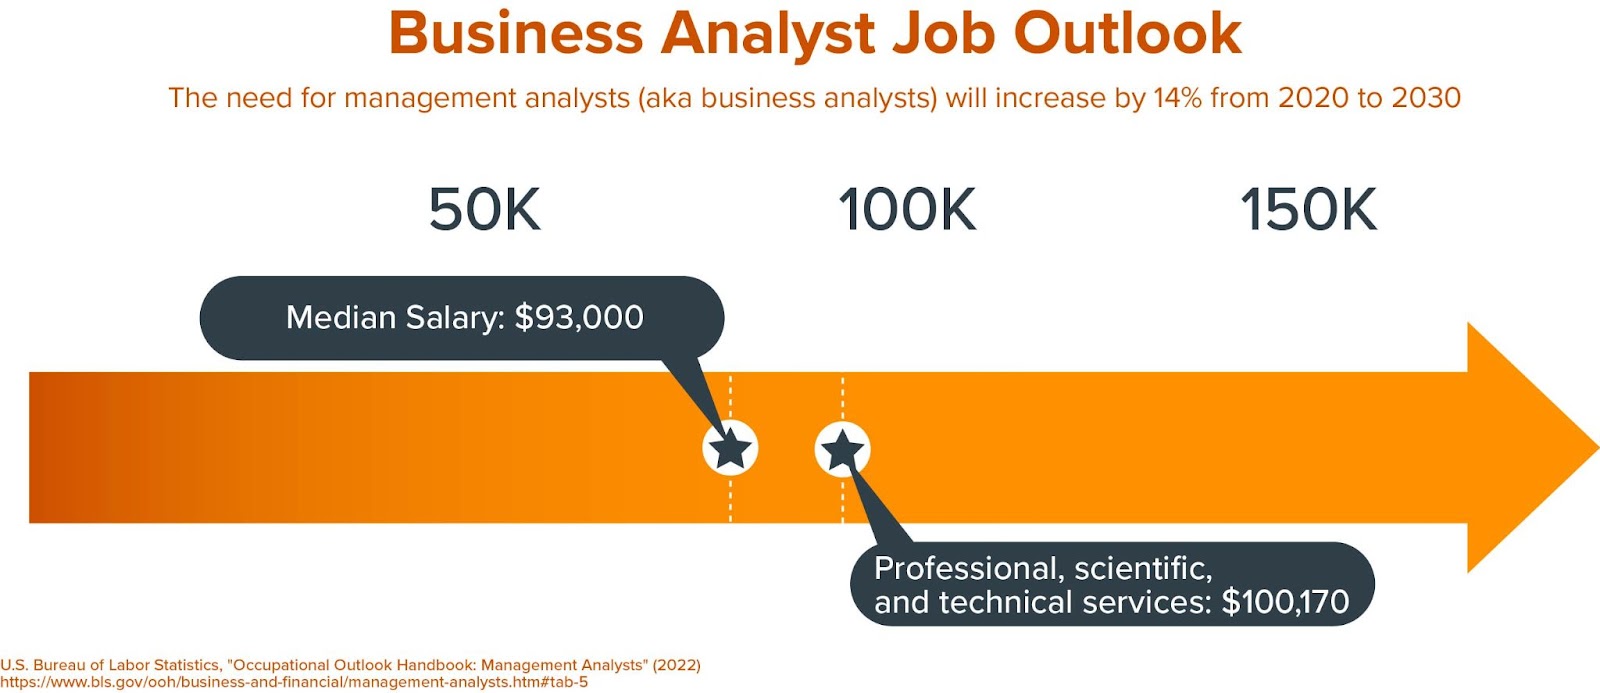 An image showcasing job market statistics for business analysts.